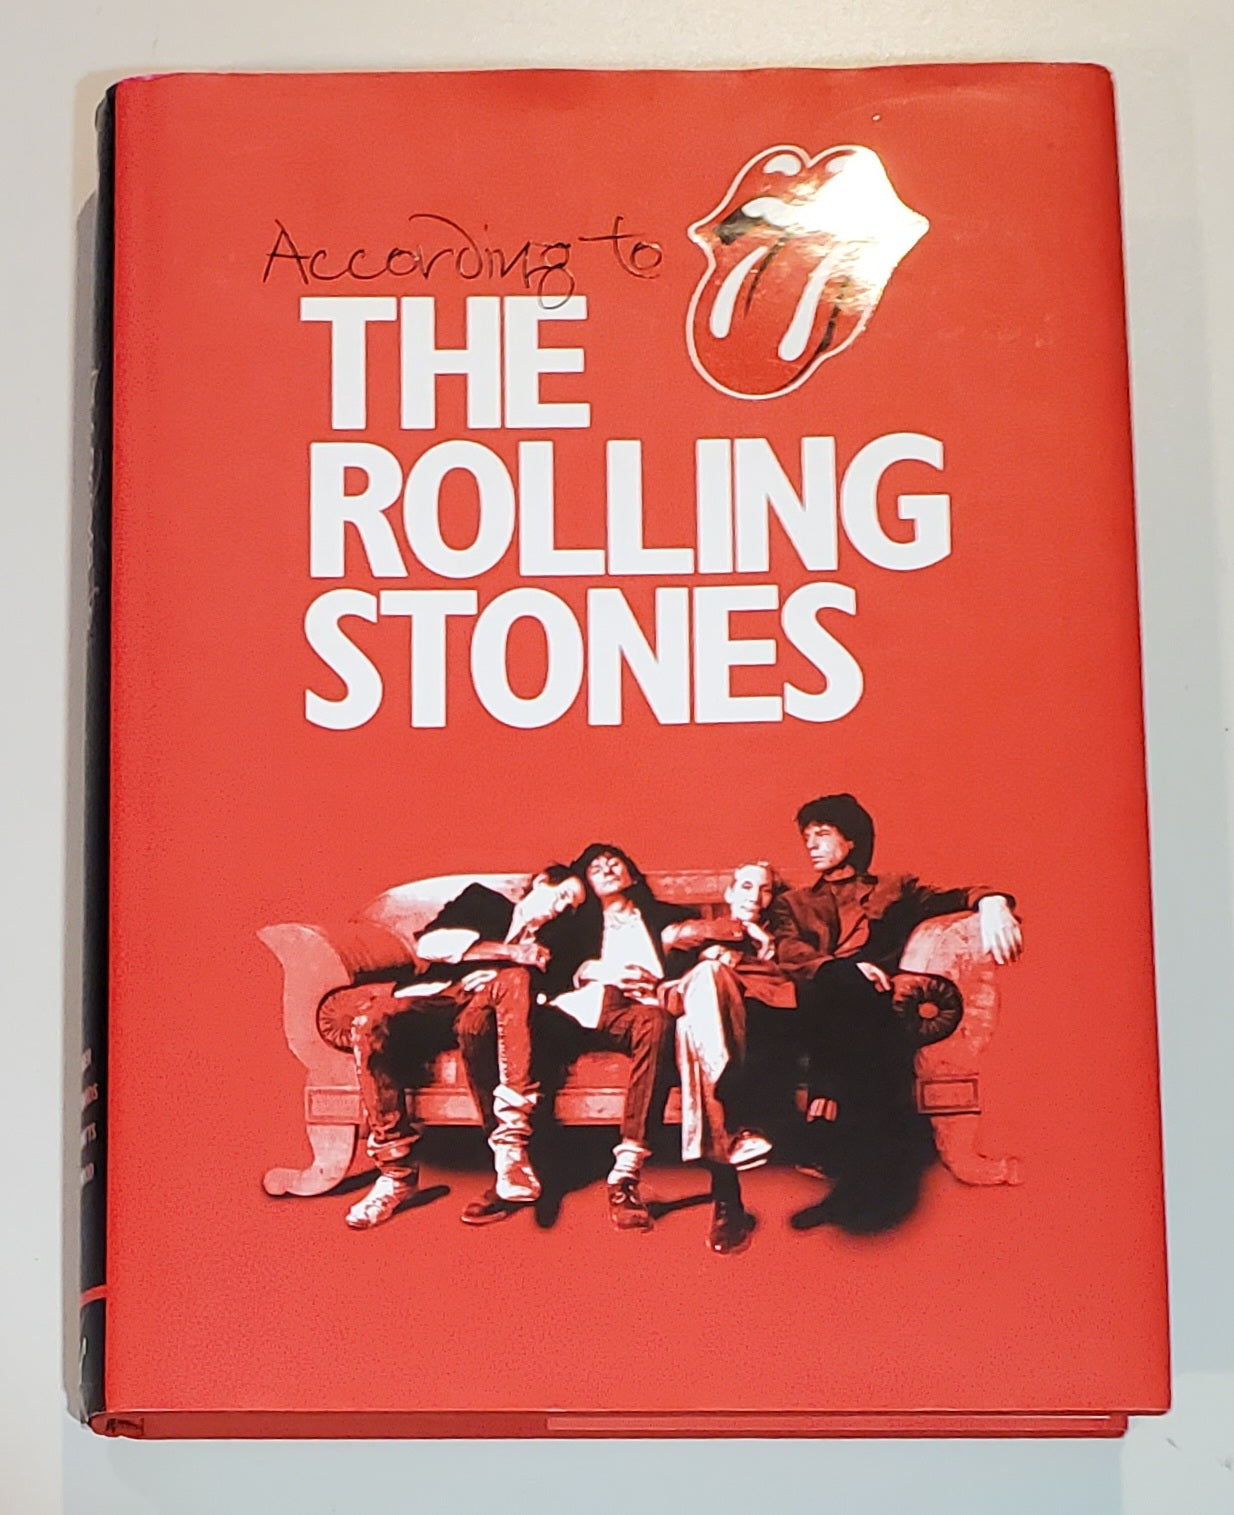 According to the Rolling Stones by Mick Jagger, Keith Richards, Charlie Watts, Ronnie Woods